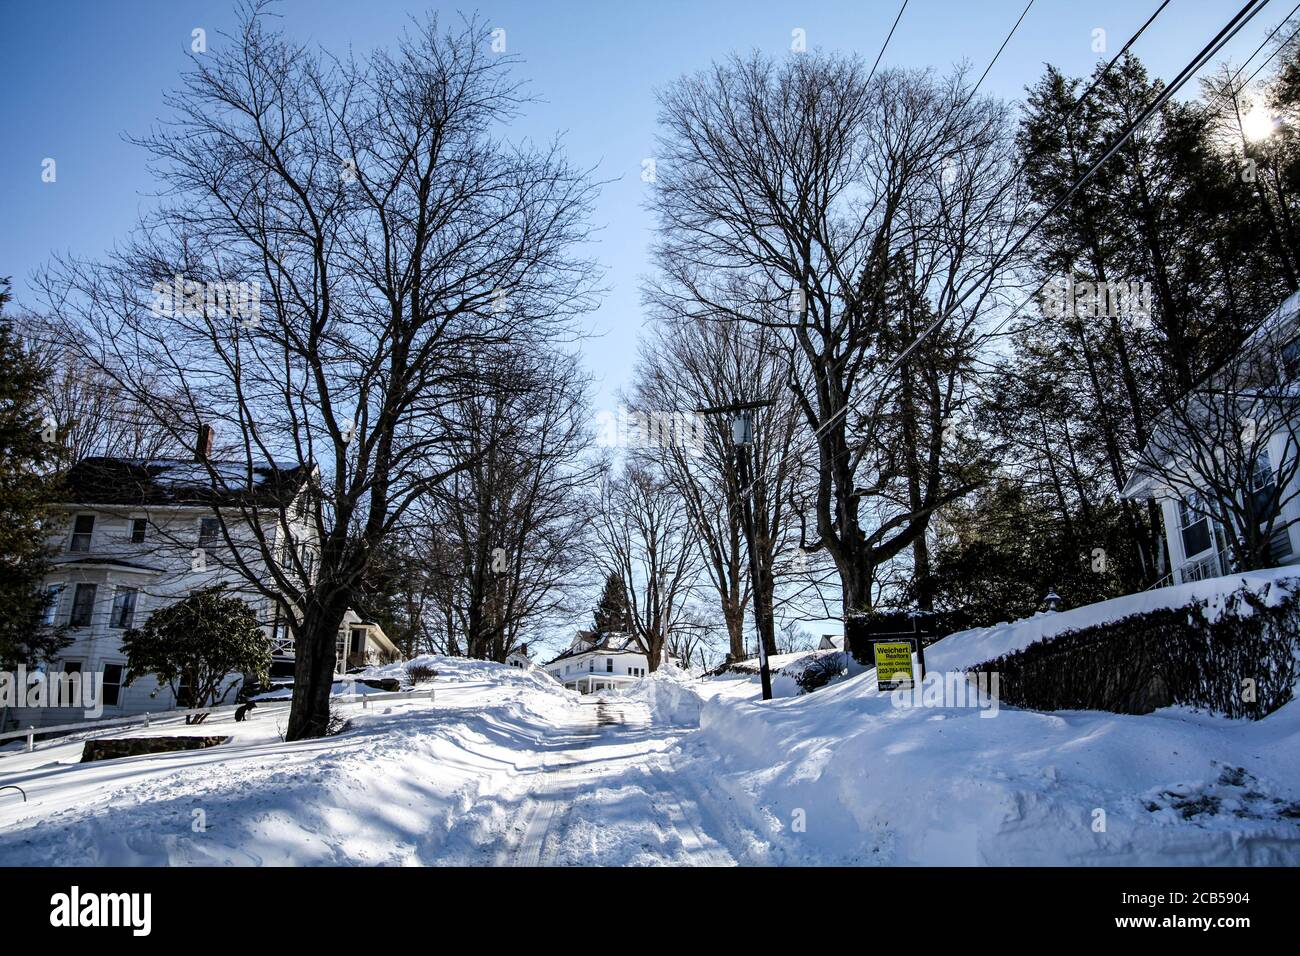 The street in the neighborhood of small town covered by snow on the next day after the snowfall Stock Photo